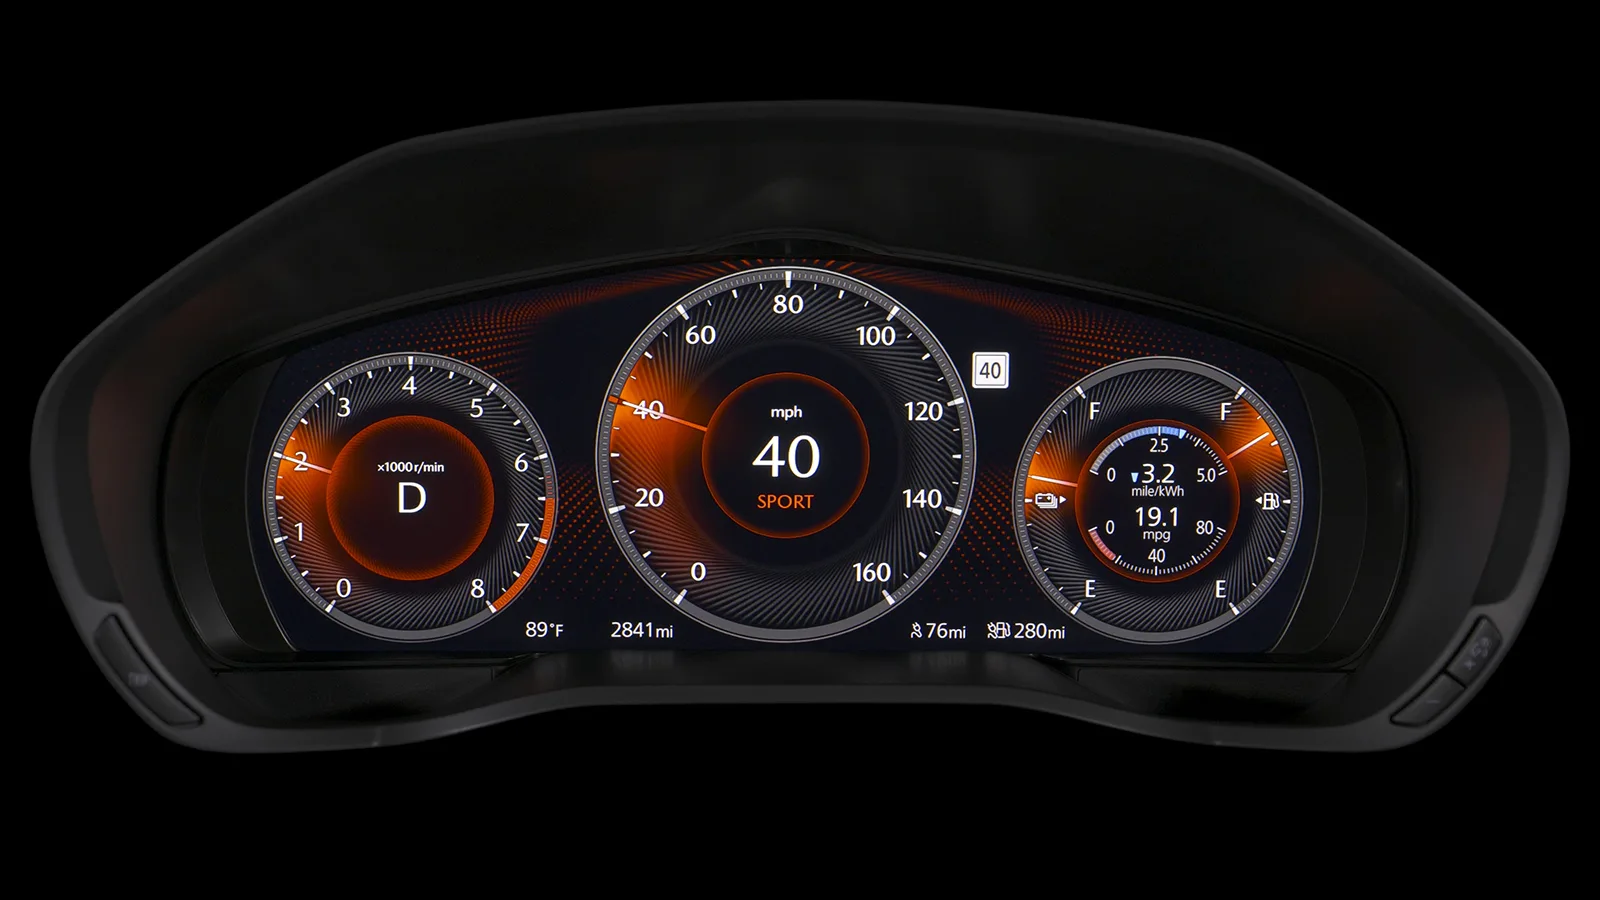 Mazda CX-70 Dashboard Now Equipped with Panasonic’s Advanced Full-Display Meters for Seamless Vehicle Monitoring Experience